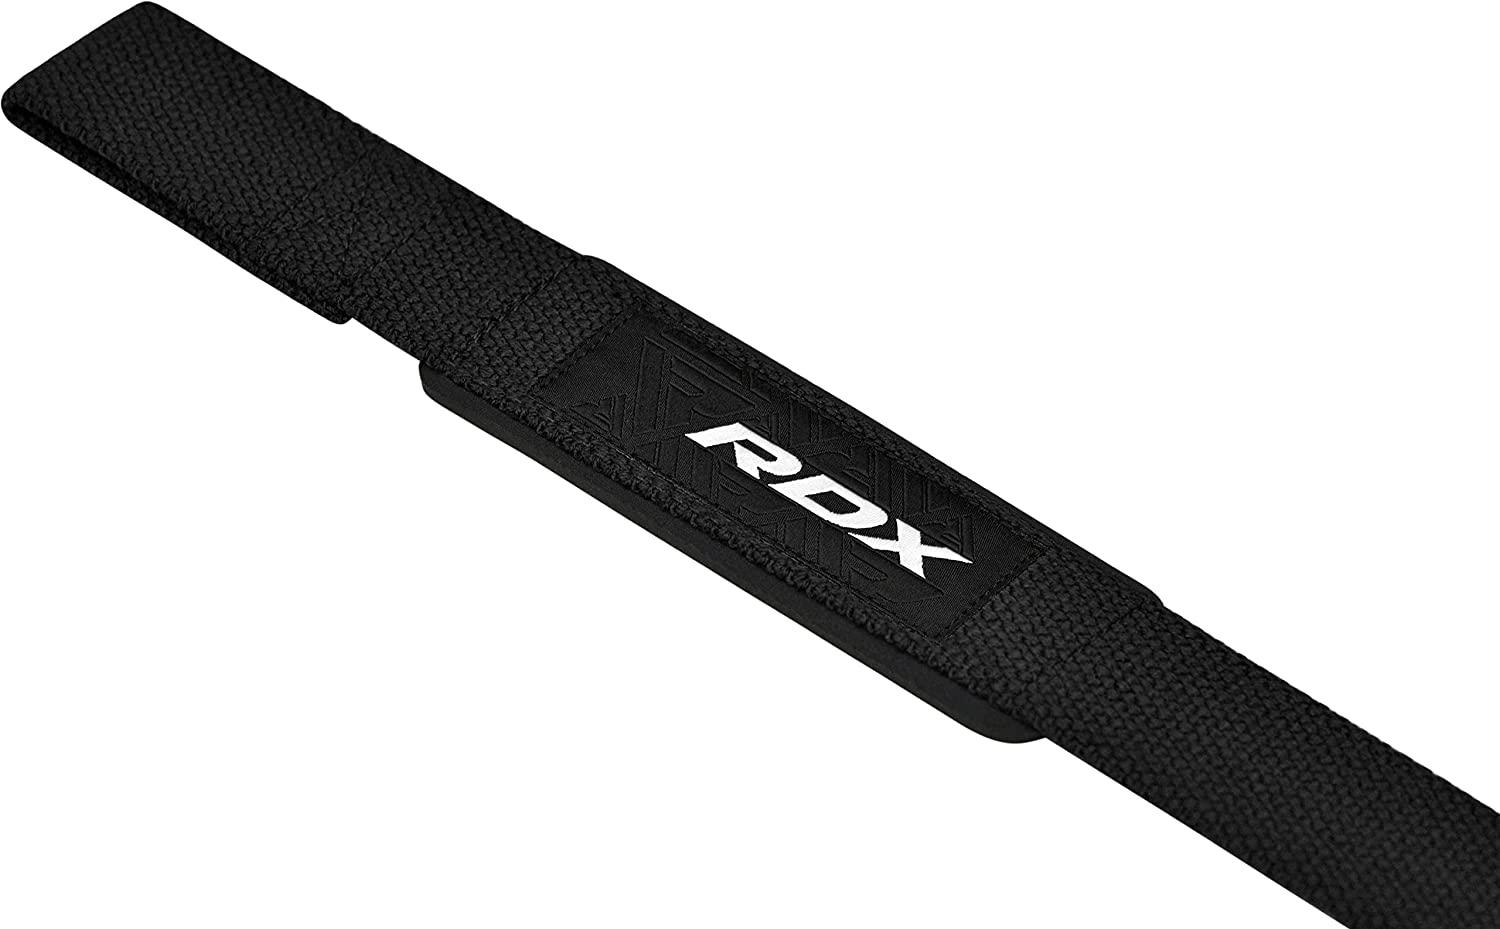 RDX Lifting Wrist Straps for Weightlifting, 5MM Neoprene Padded Anti Slip  60CM Hand Bar Support Grips, Strength Training Equipment Heavy Duty Workout  Bodybuilding Powerlifting Gym Fitness, Men Women Black One Size